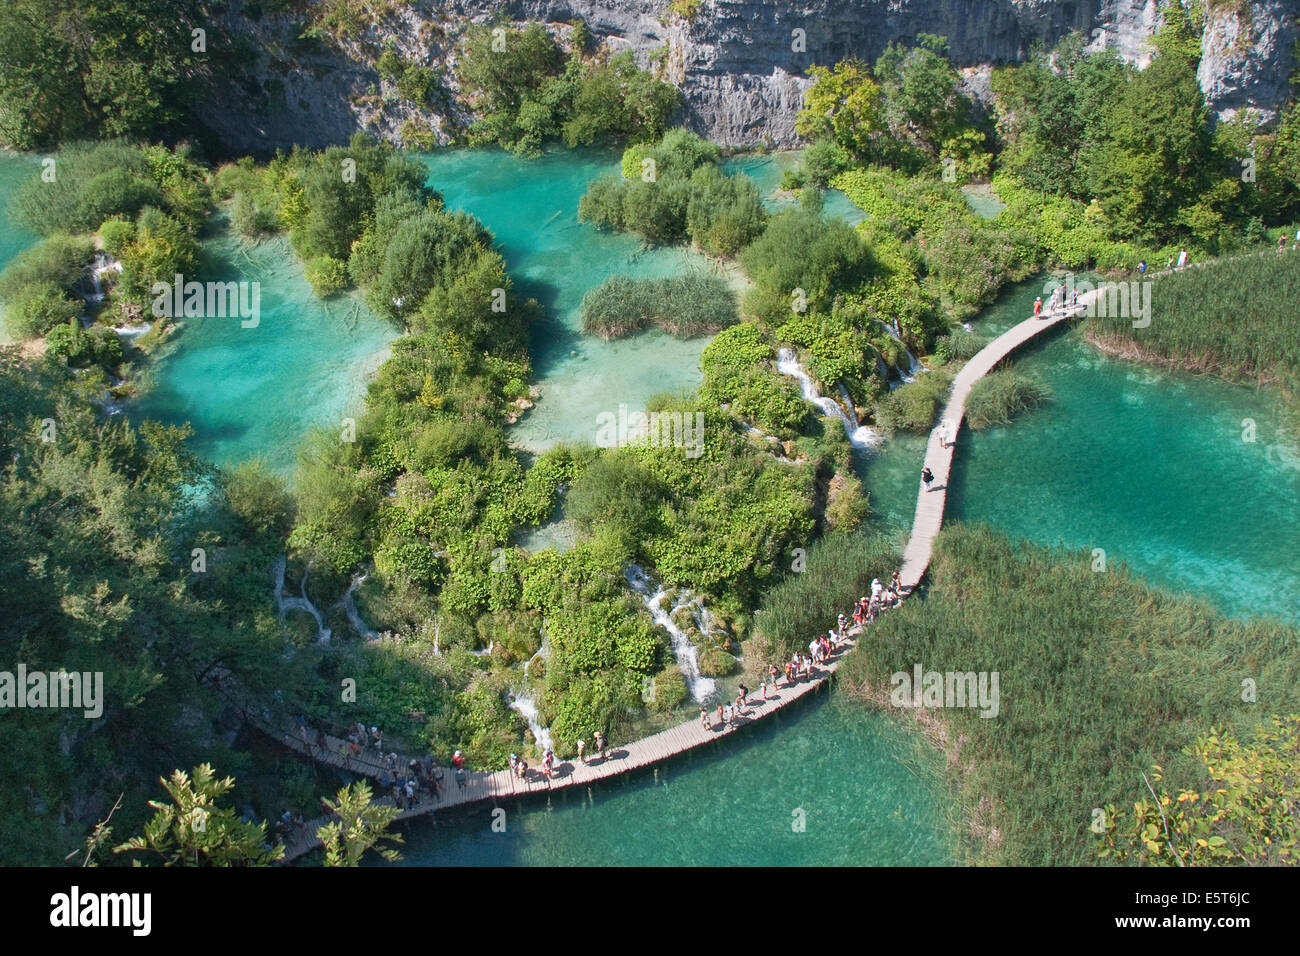 Gangway over a lake in the Plitvice Lakes National Park, Croatia. Stock Photo